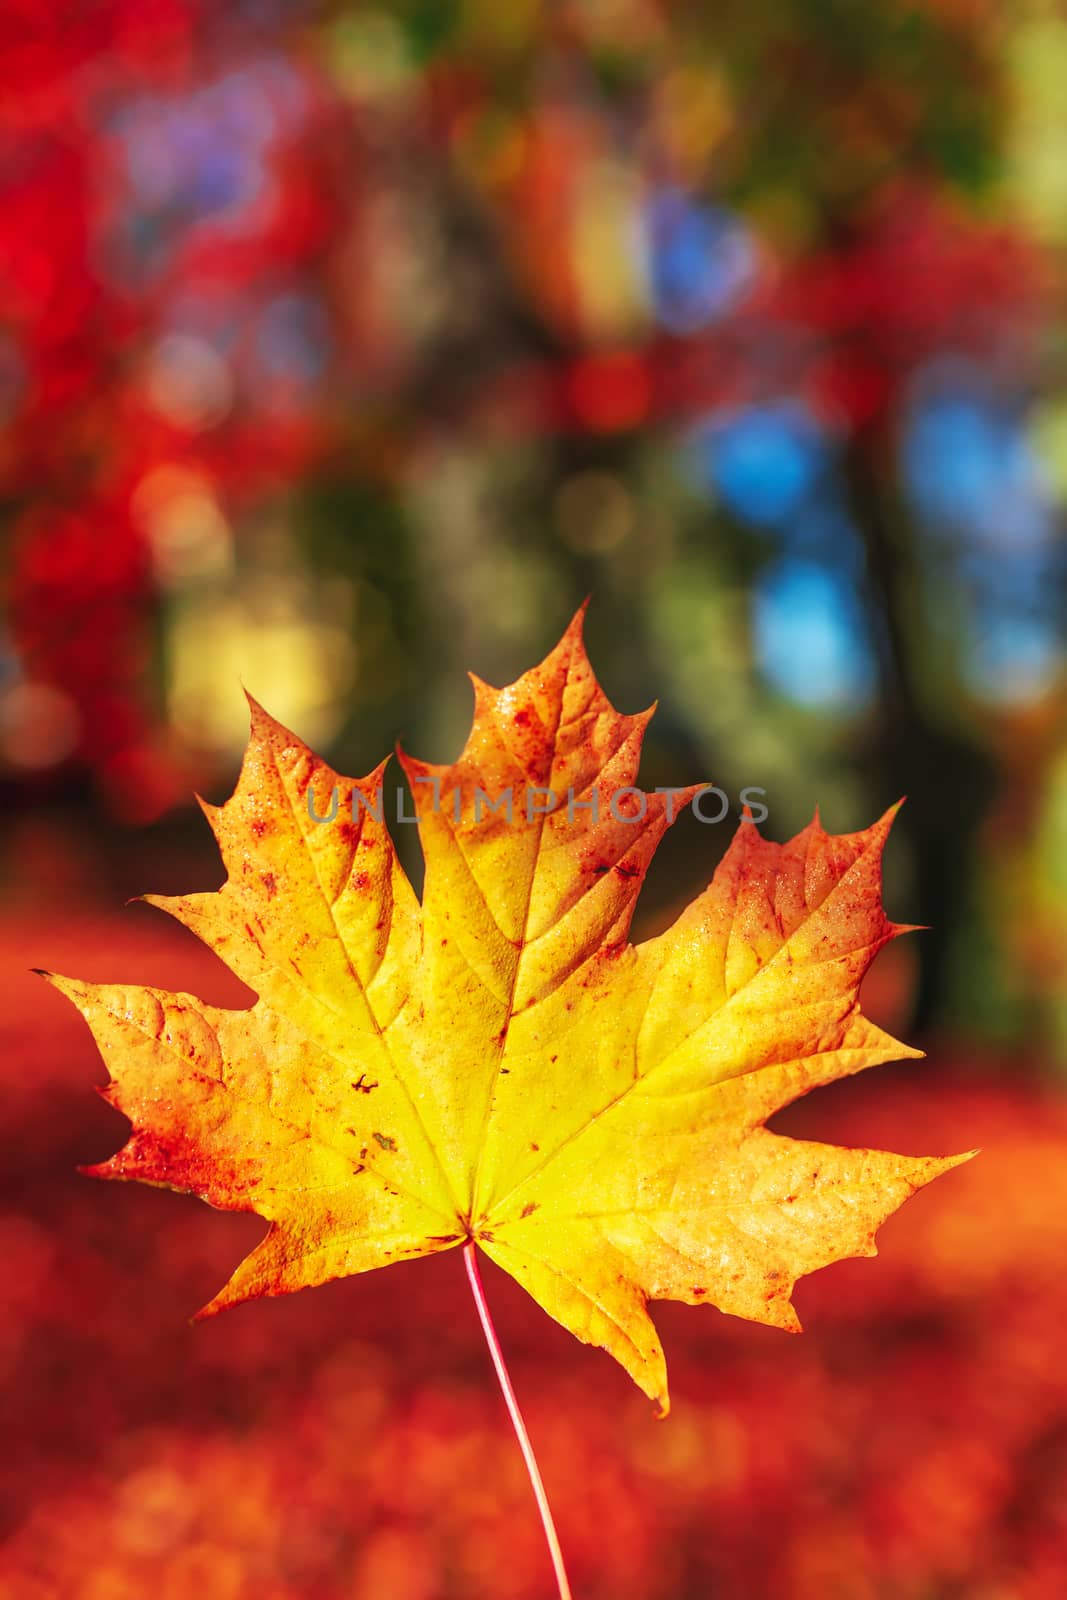 Autumn leaves with shallow focus background by artush